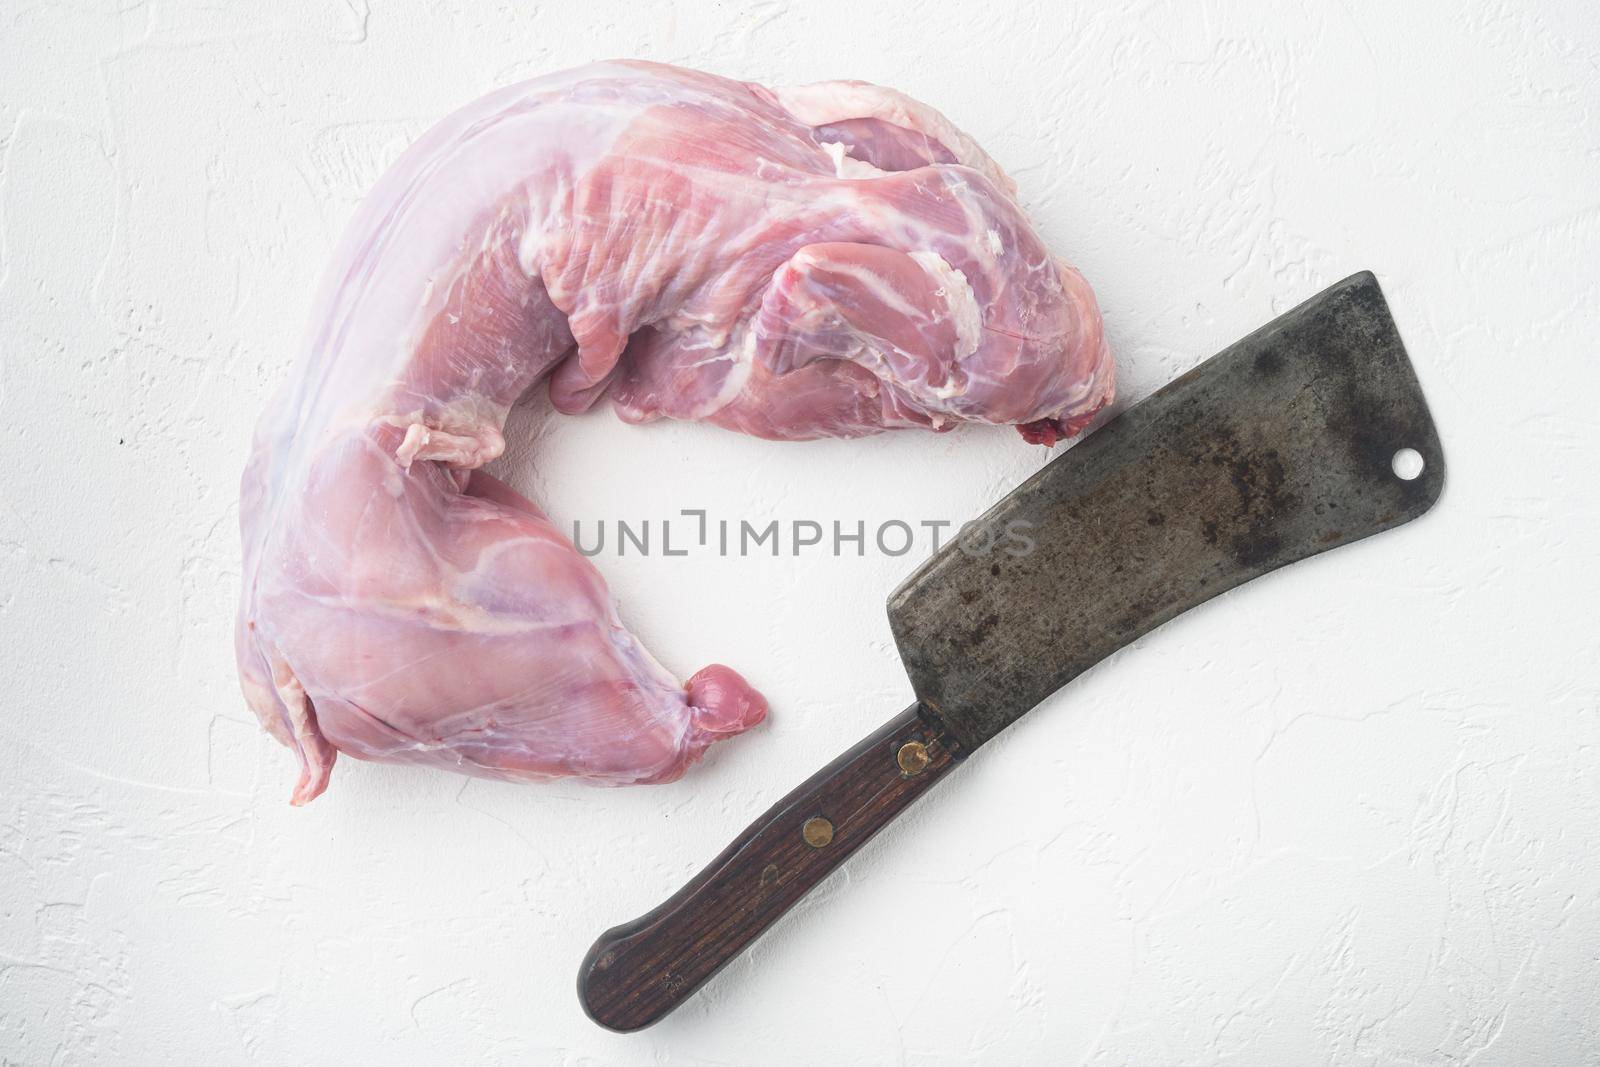 Fresh raw rabbit meat, and old butcher cleaver knife, on white stone background by Ilianesolenyi